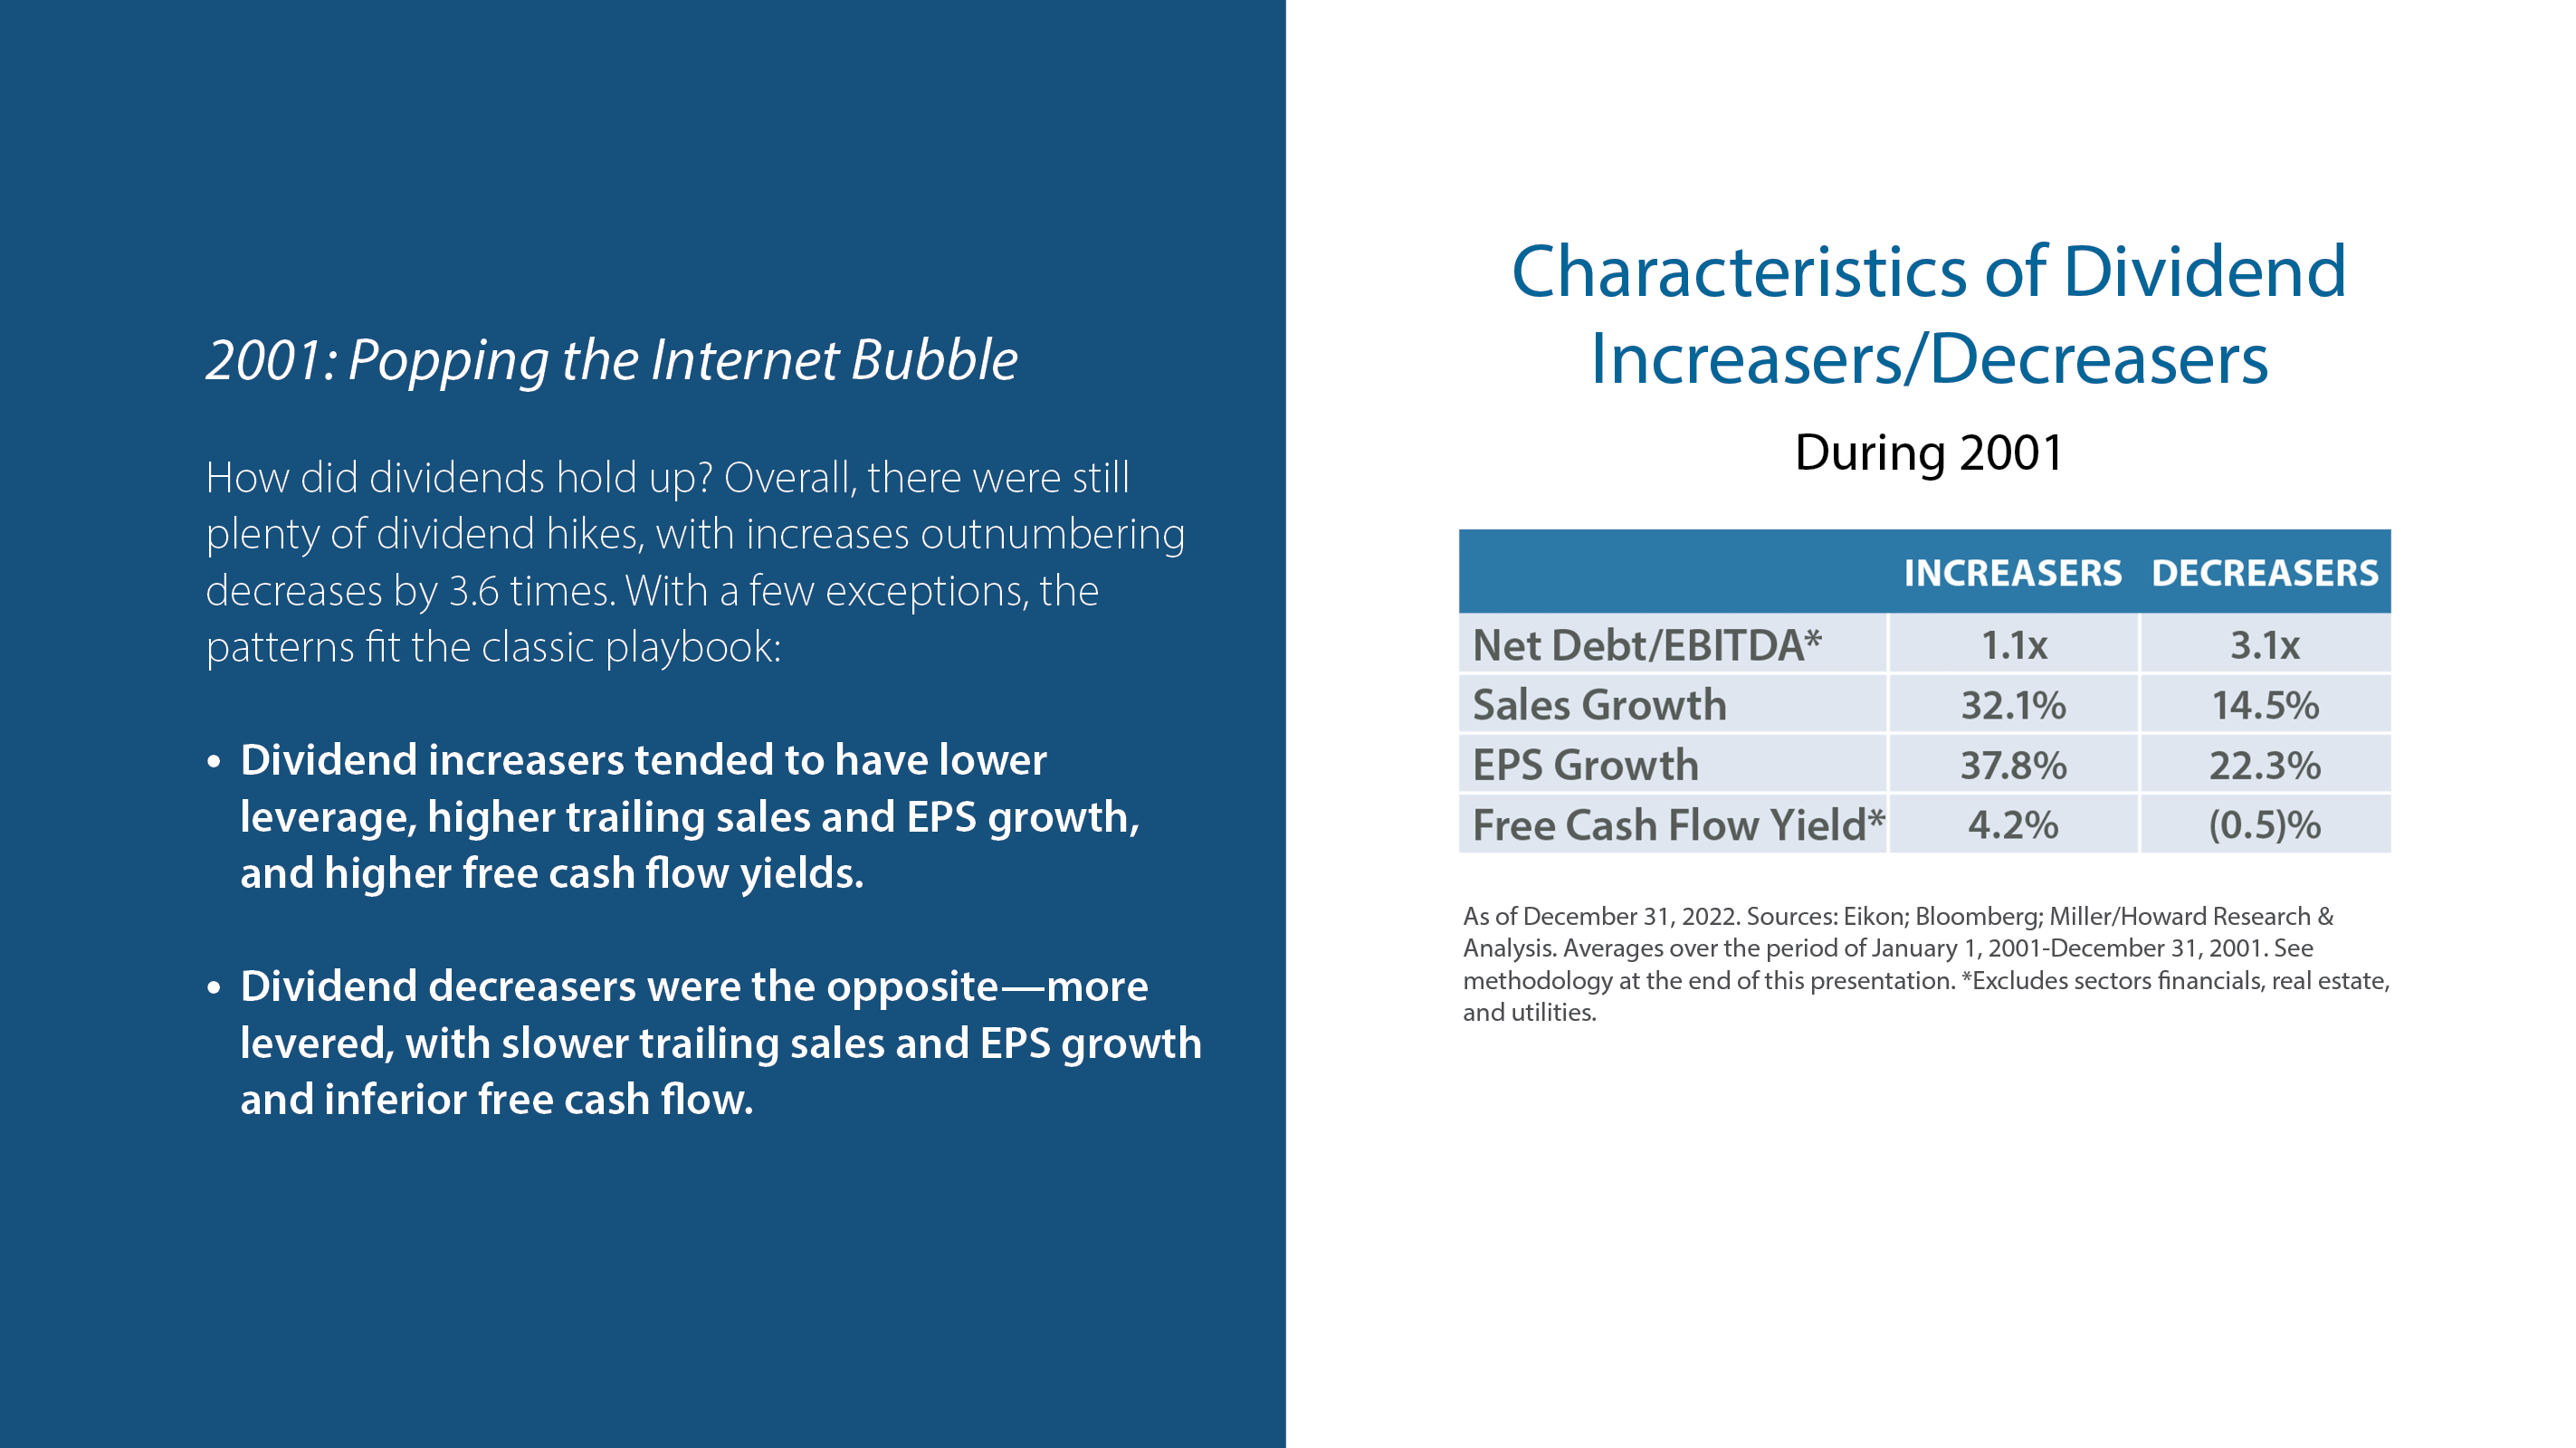 2001: Popping the Internet Bubble